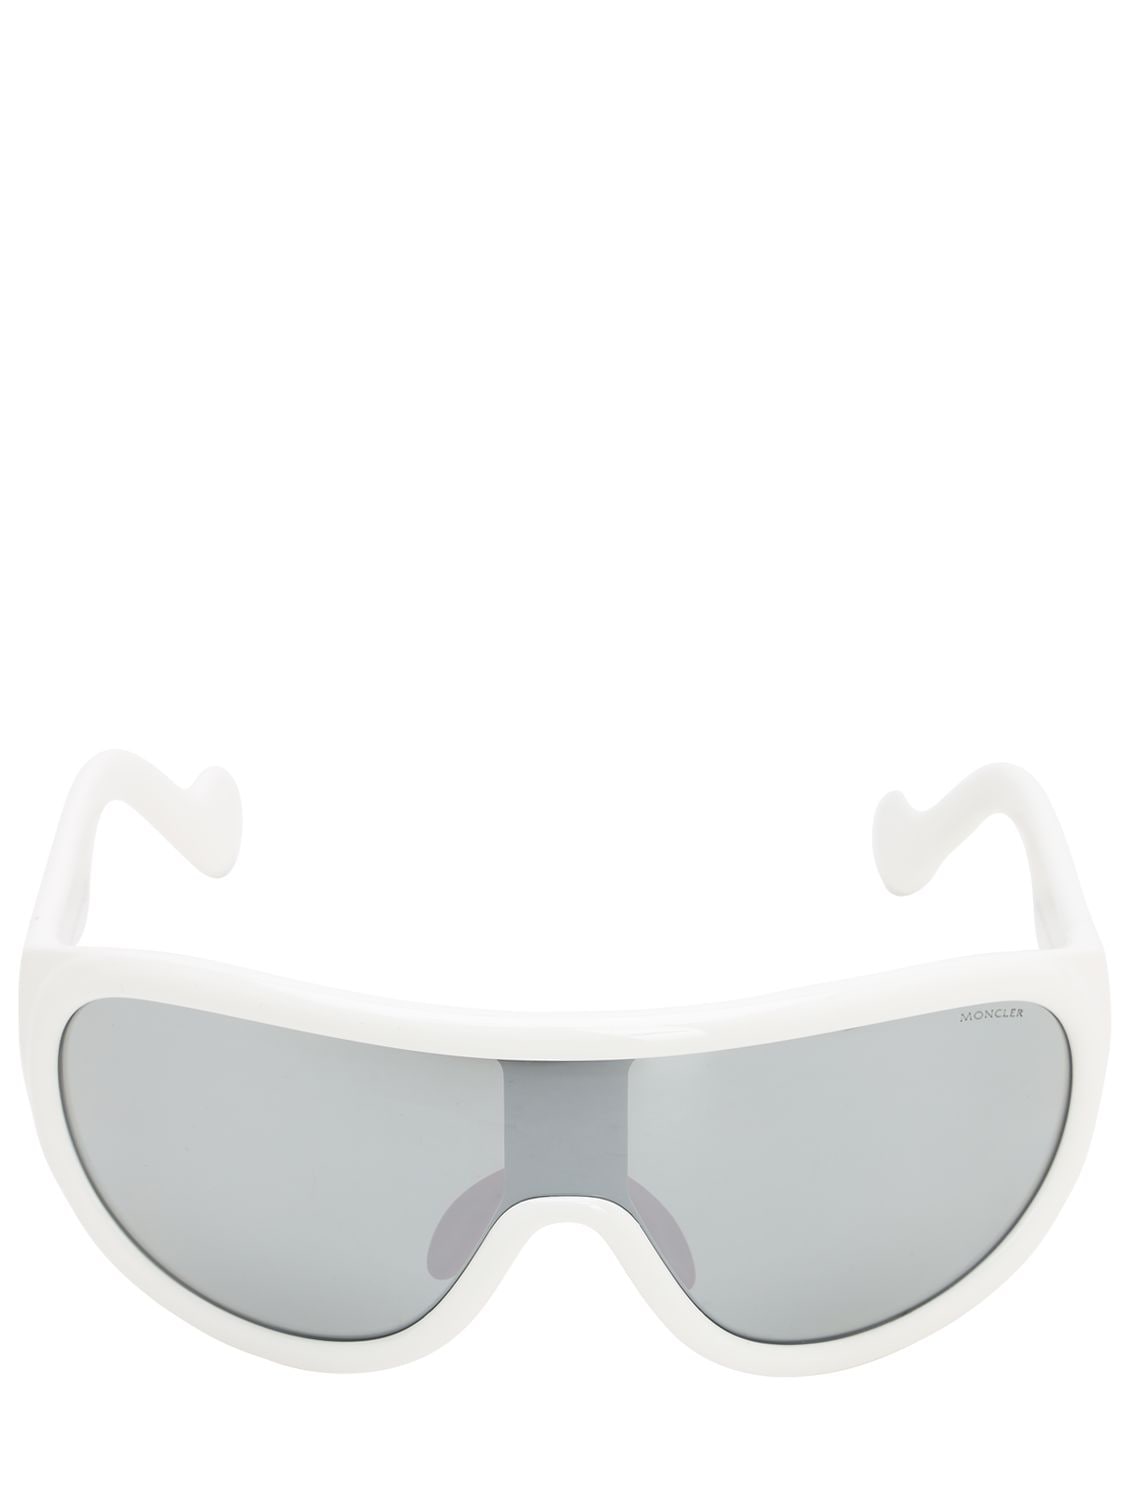 MONCLER MONCLER SHIELD MIRRORED SUNGLASSES,70IXH9008-MJFD0